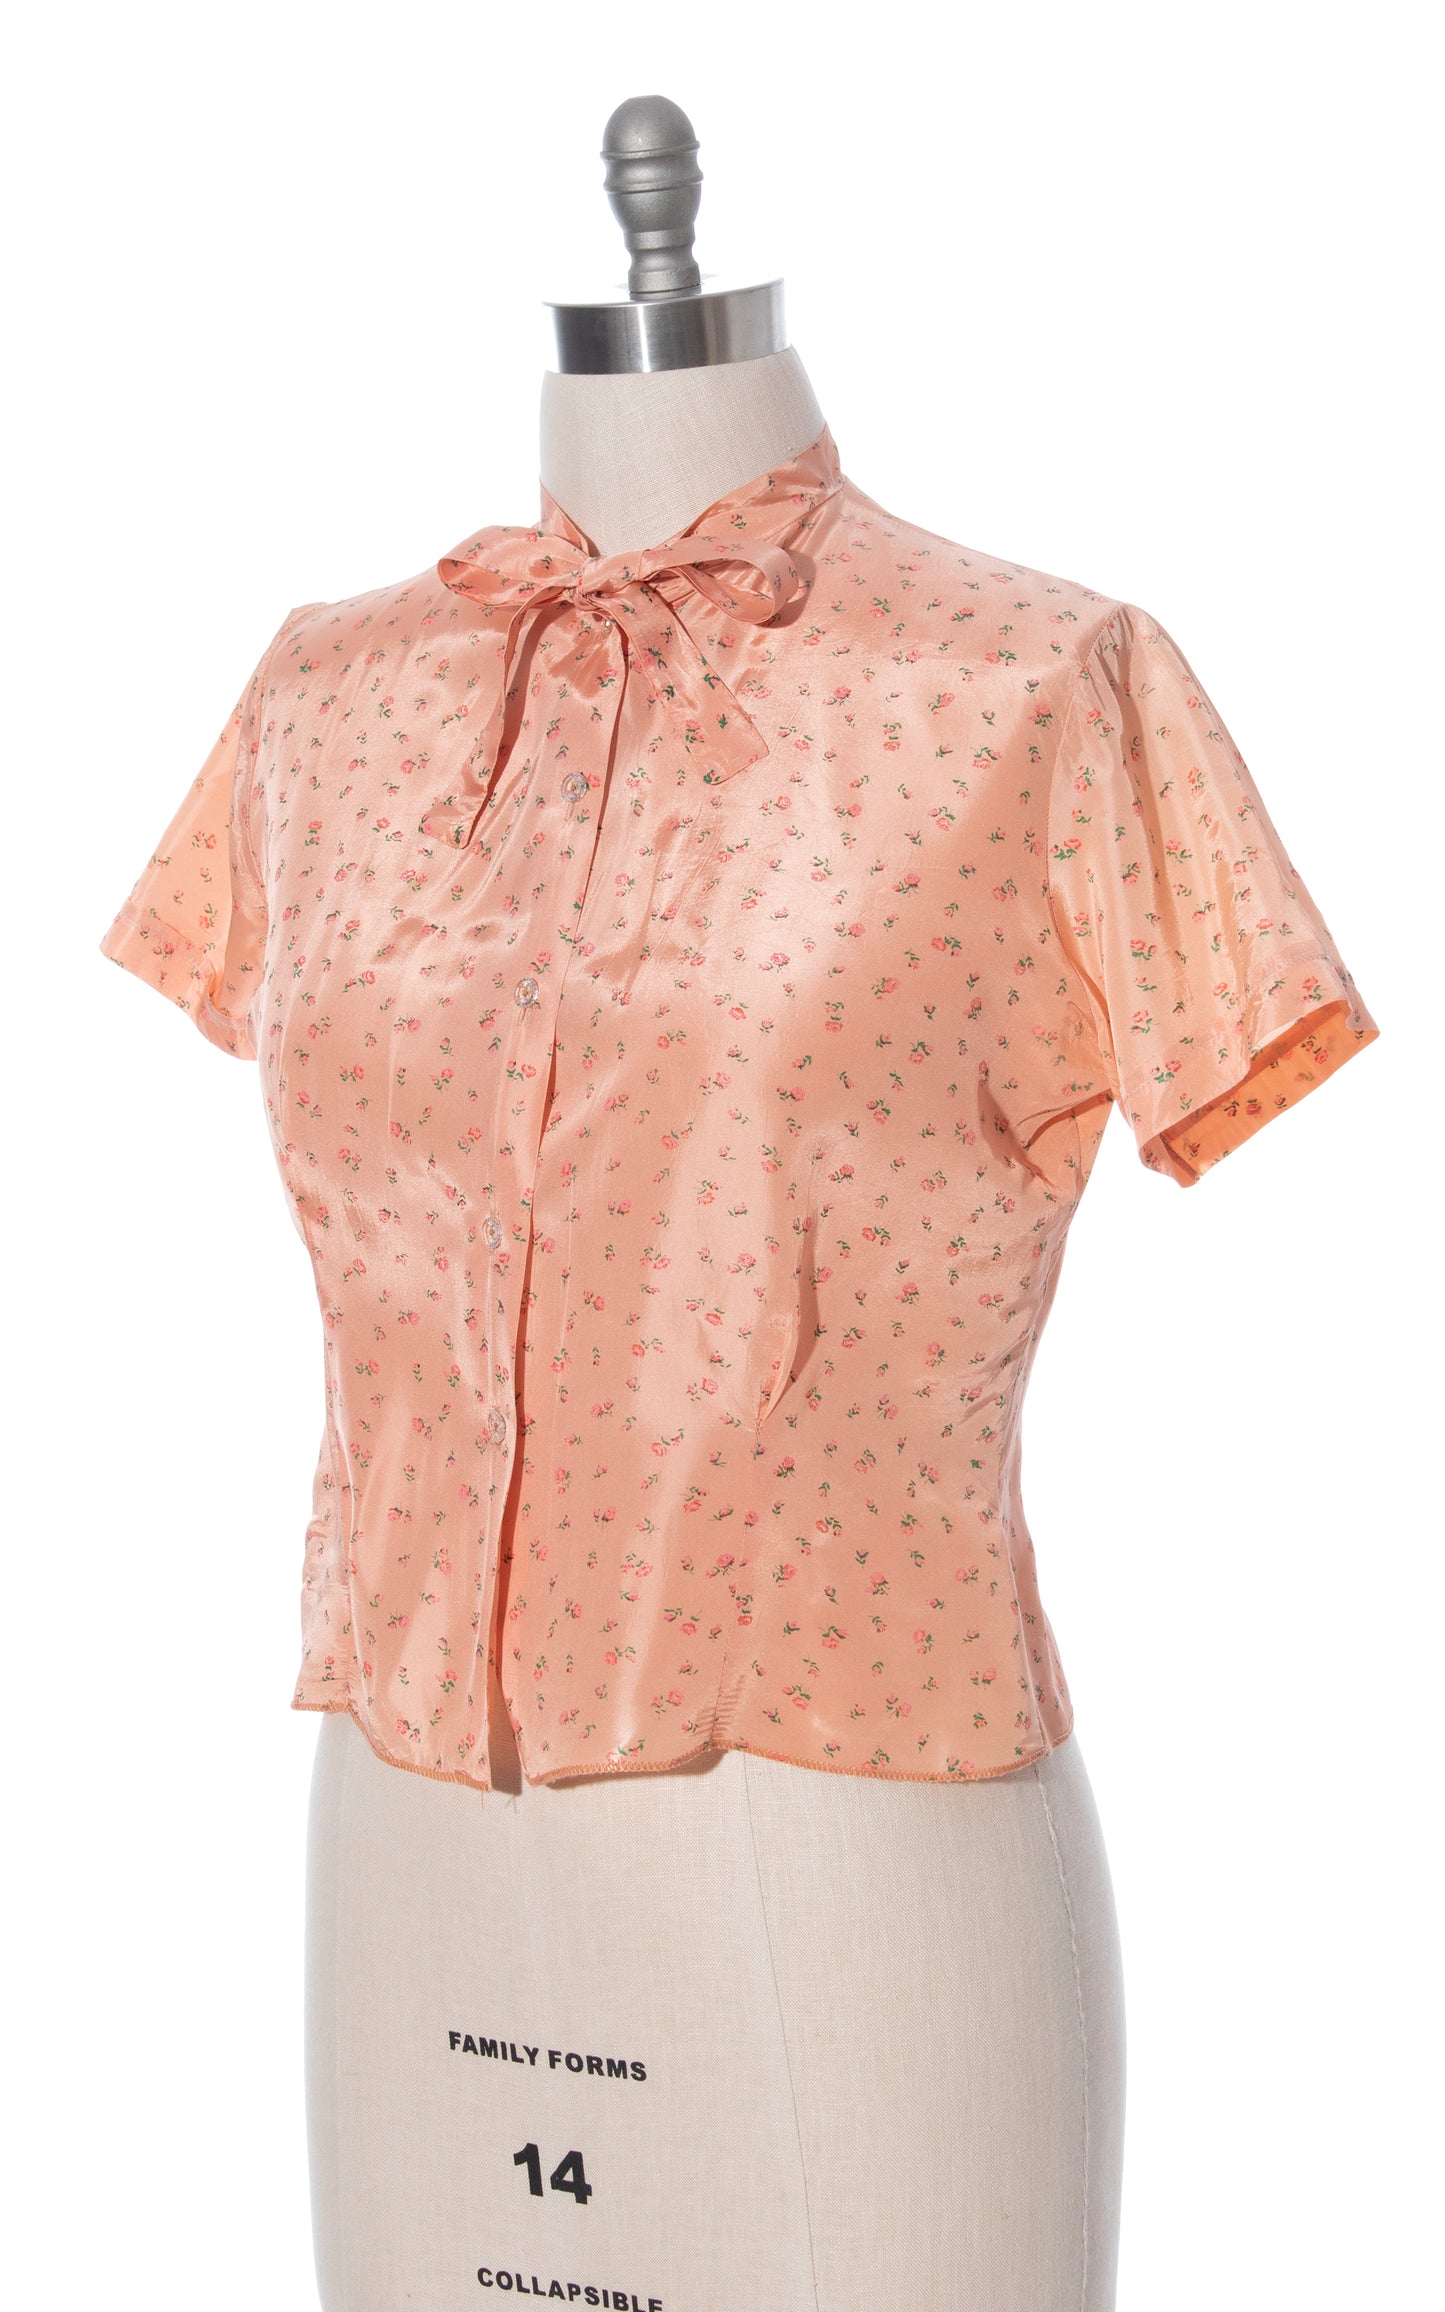 Vintage 1950s 50s Rose Floral Printed Pussy Bow Short Sleeve Blouse Button Up Top BirthdayLifeVintage